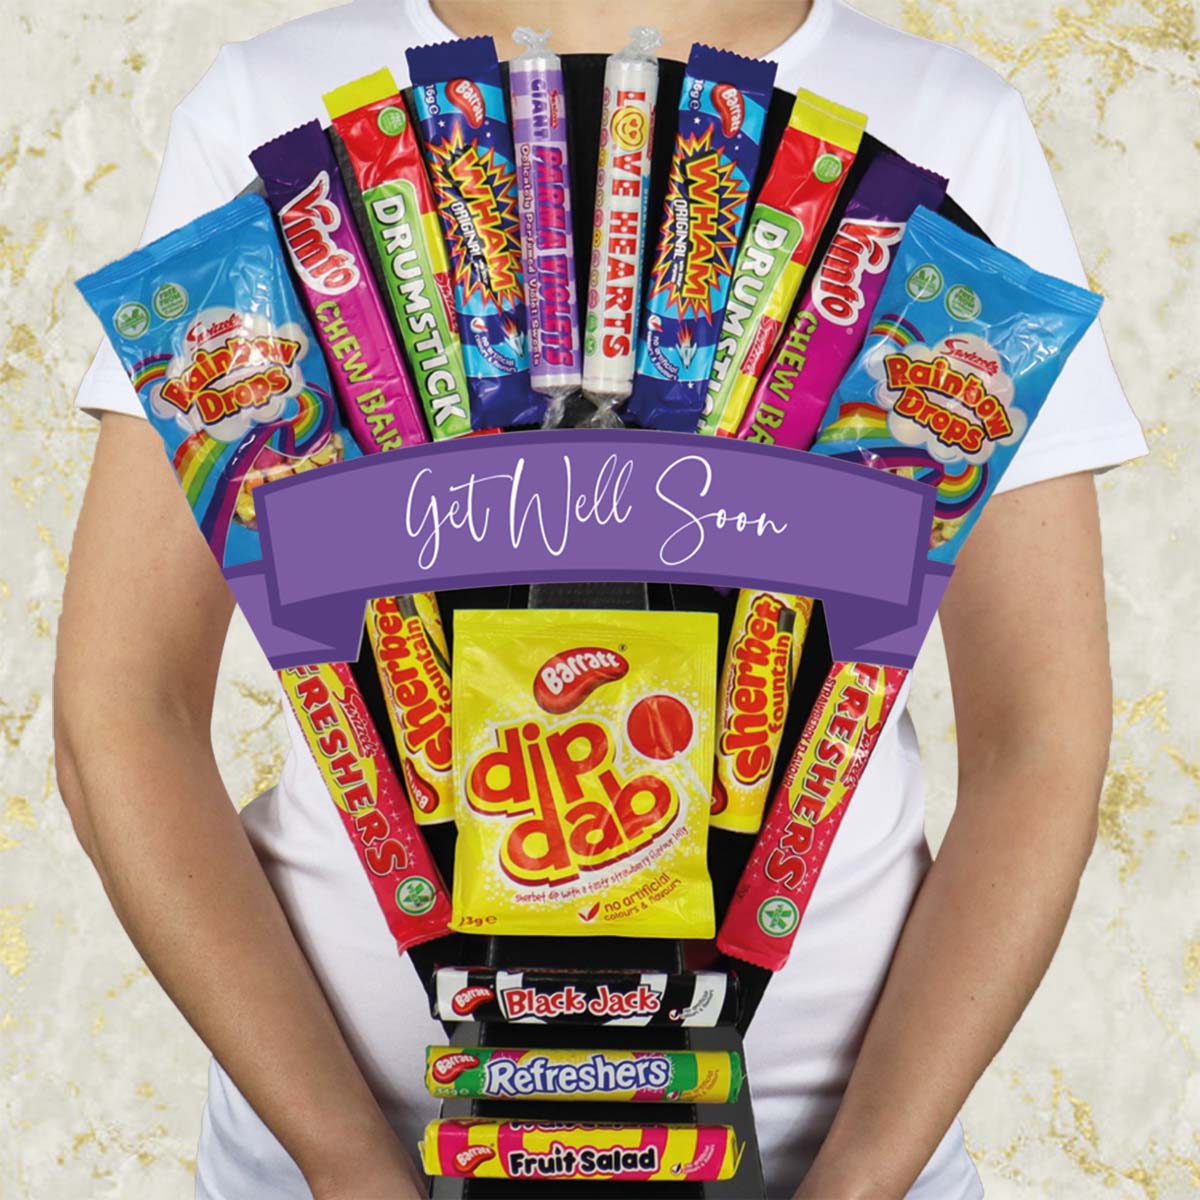 The XL Retro Sweets Get Well Soon Bouquet with Parma Violets, Vimto Chews - Gift Hamper Box by HamperWell